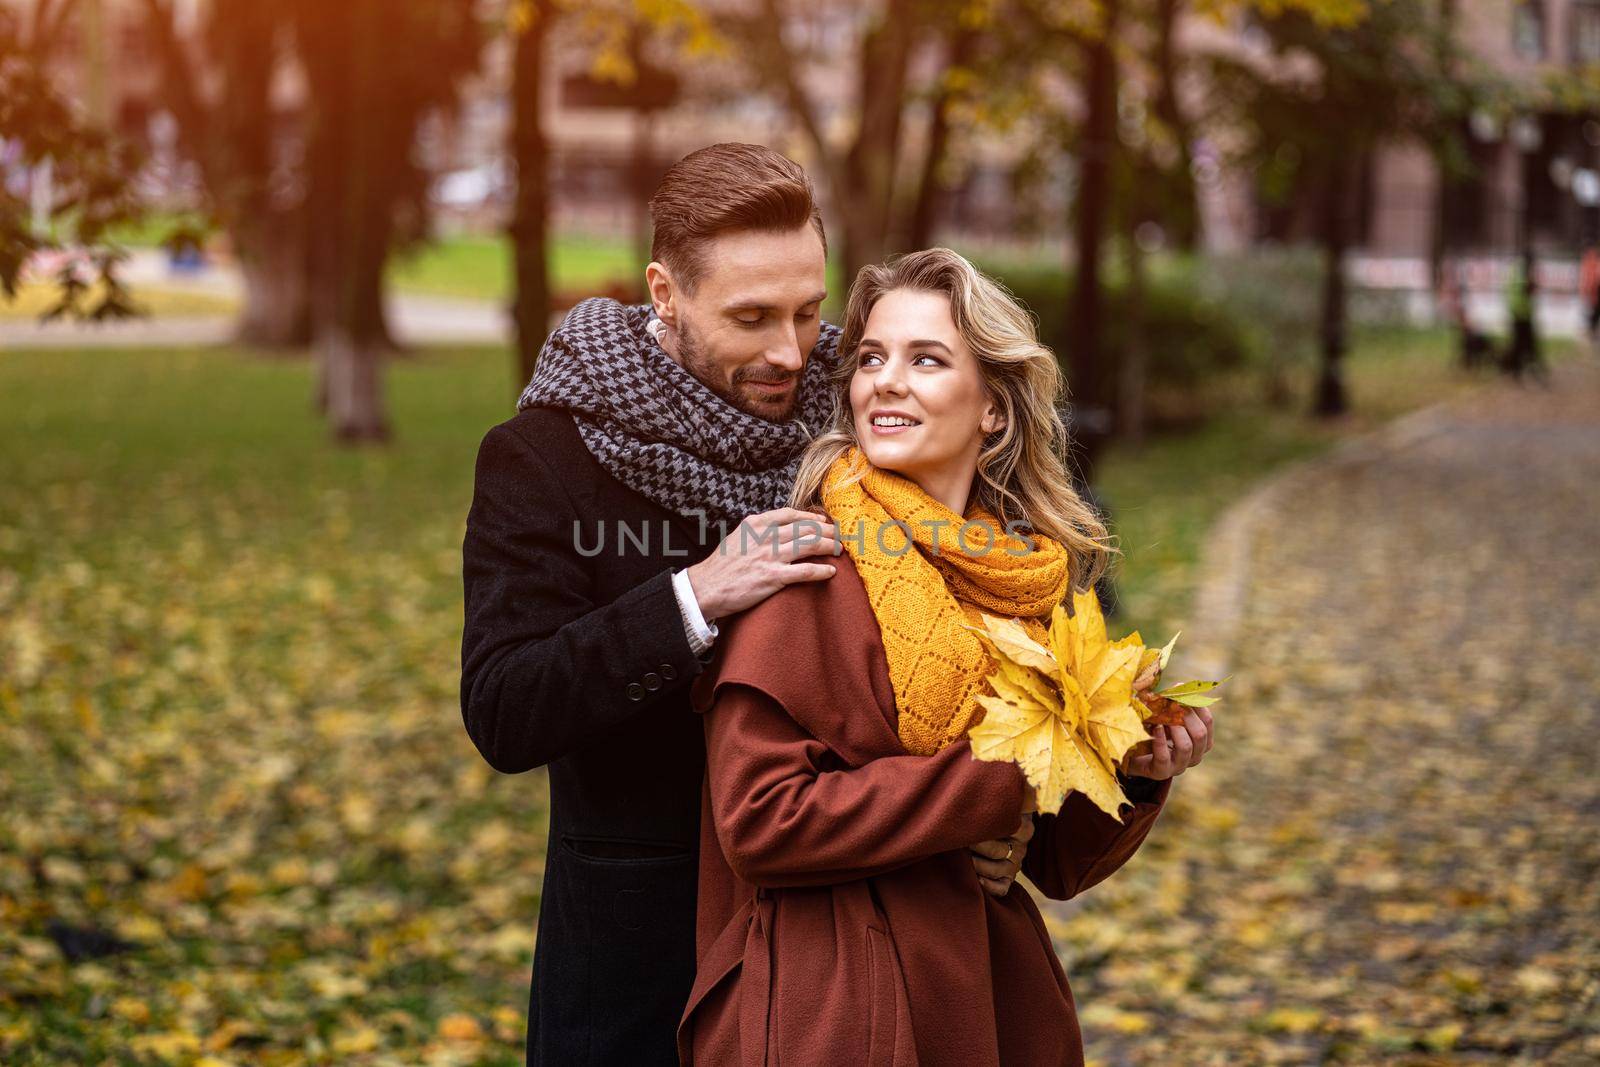 Loving couple in an autumn park. Husband and a wife smile looking at each other in the autumn park. Outdoor shot of a young couple in love having great time in a autumn park.